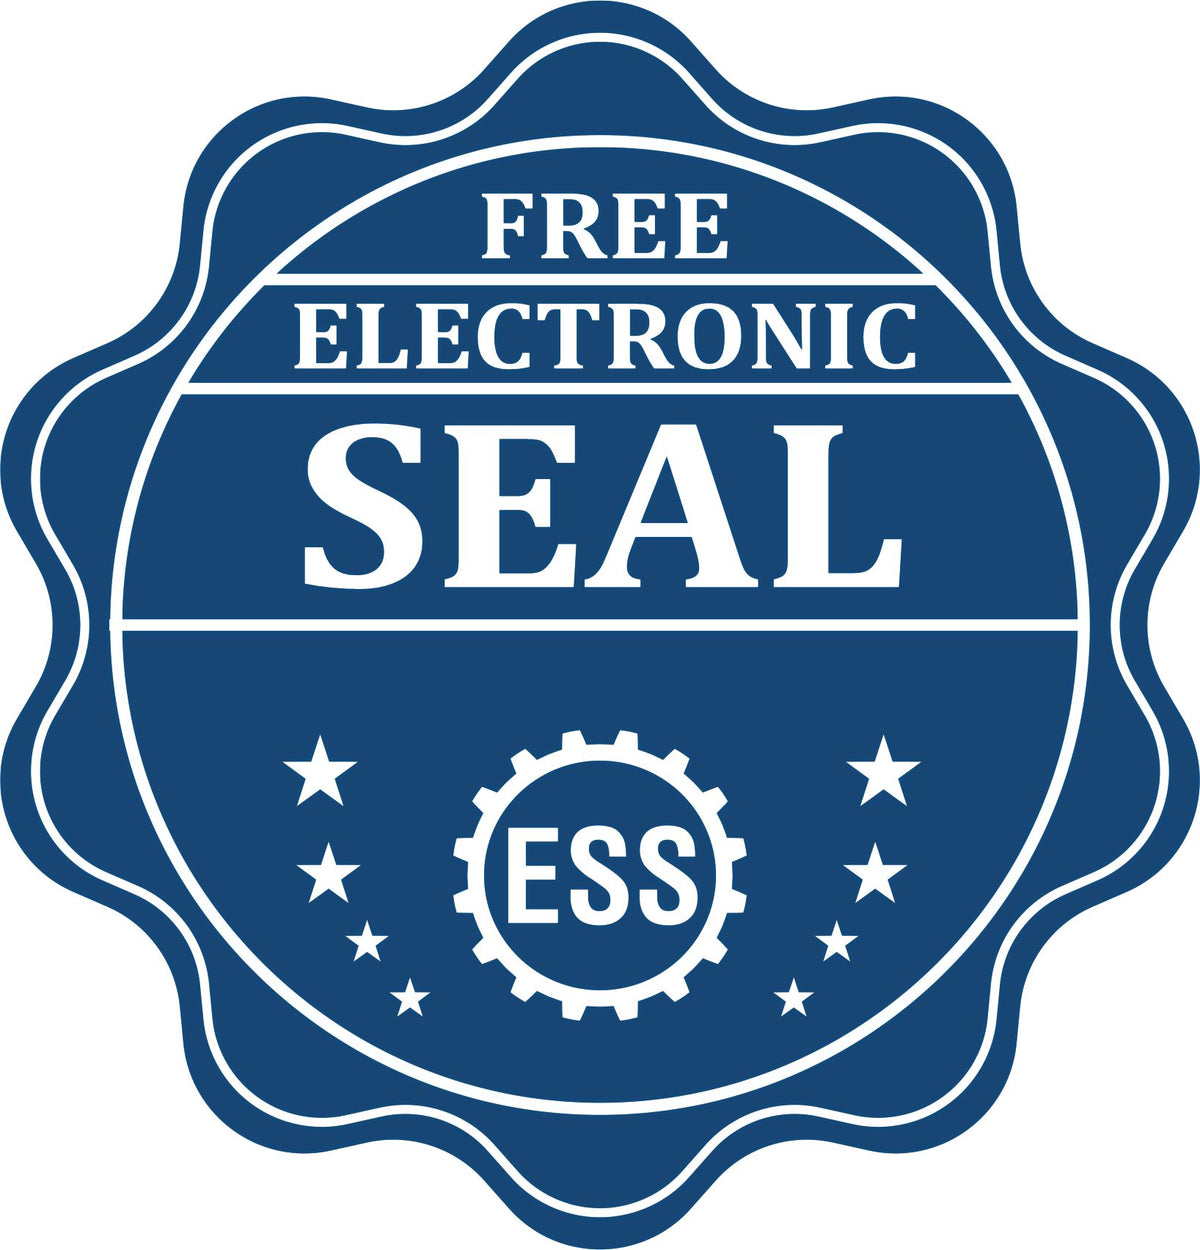 A badge showing a free electronic seal for the Delaware Desk Surveyor Seal Embosser with stars and the ESS gear on the emblem.